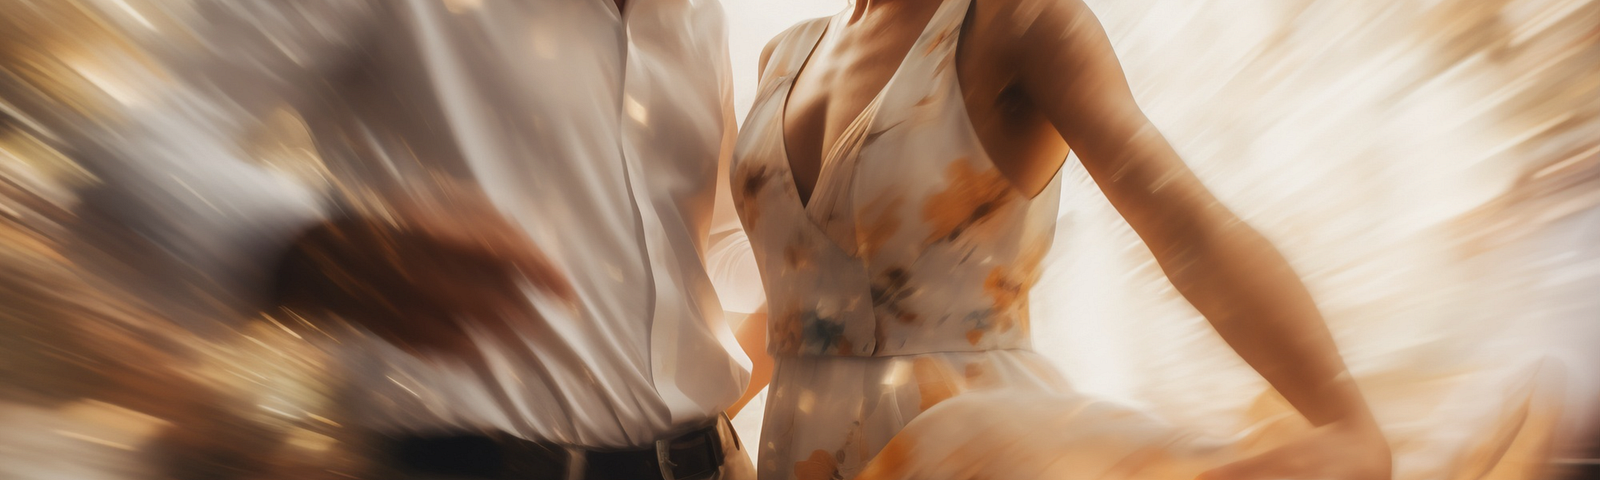 A color photograph of a male and female couple dancing closely with the woman’s dress swirling in the breeze